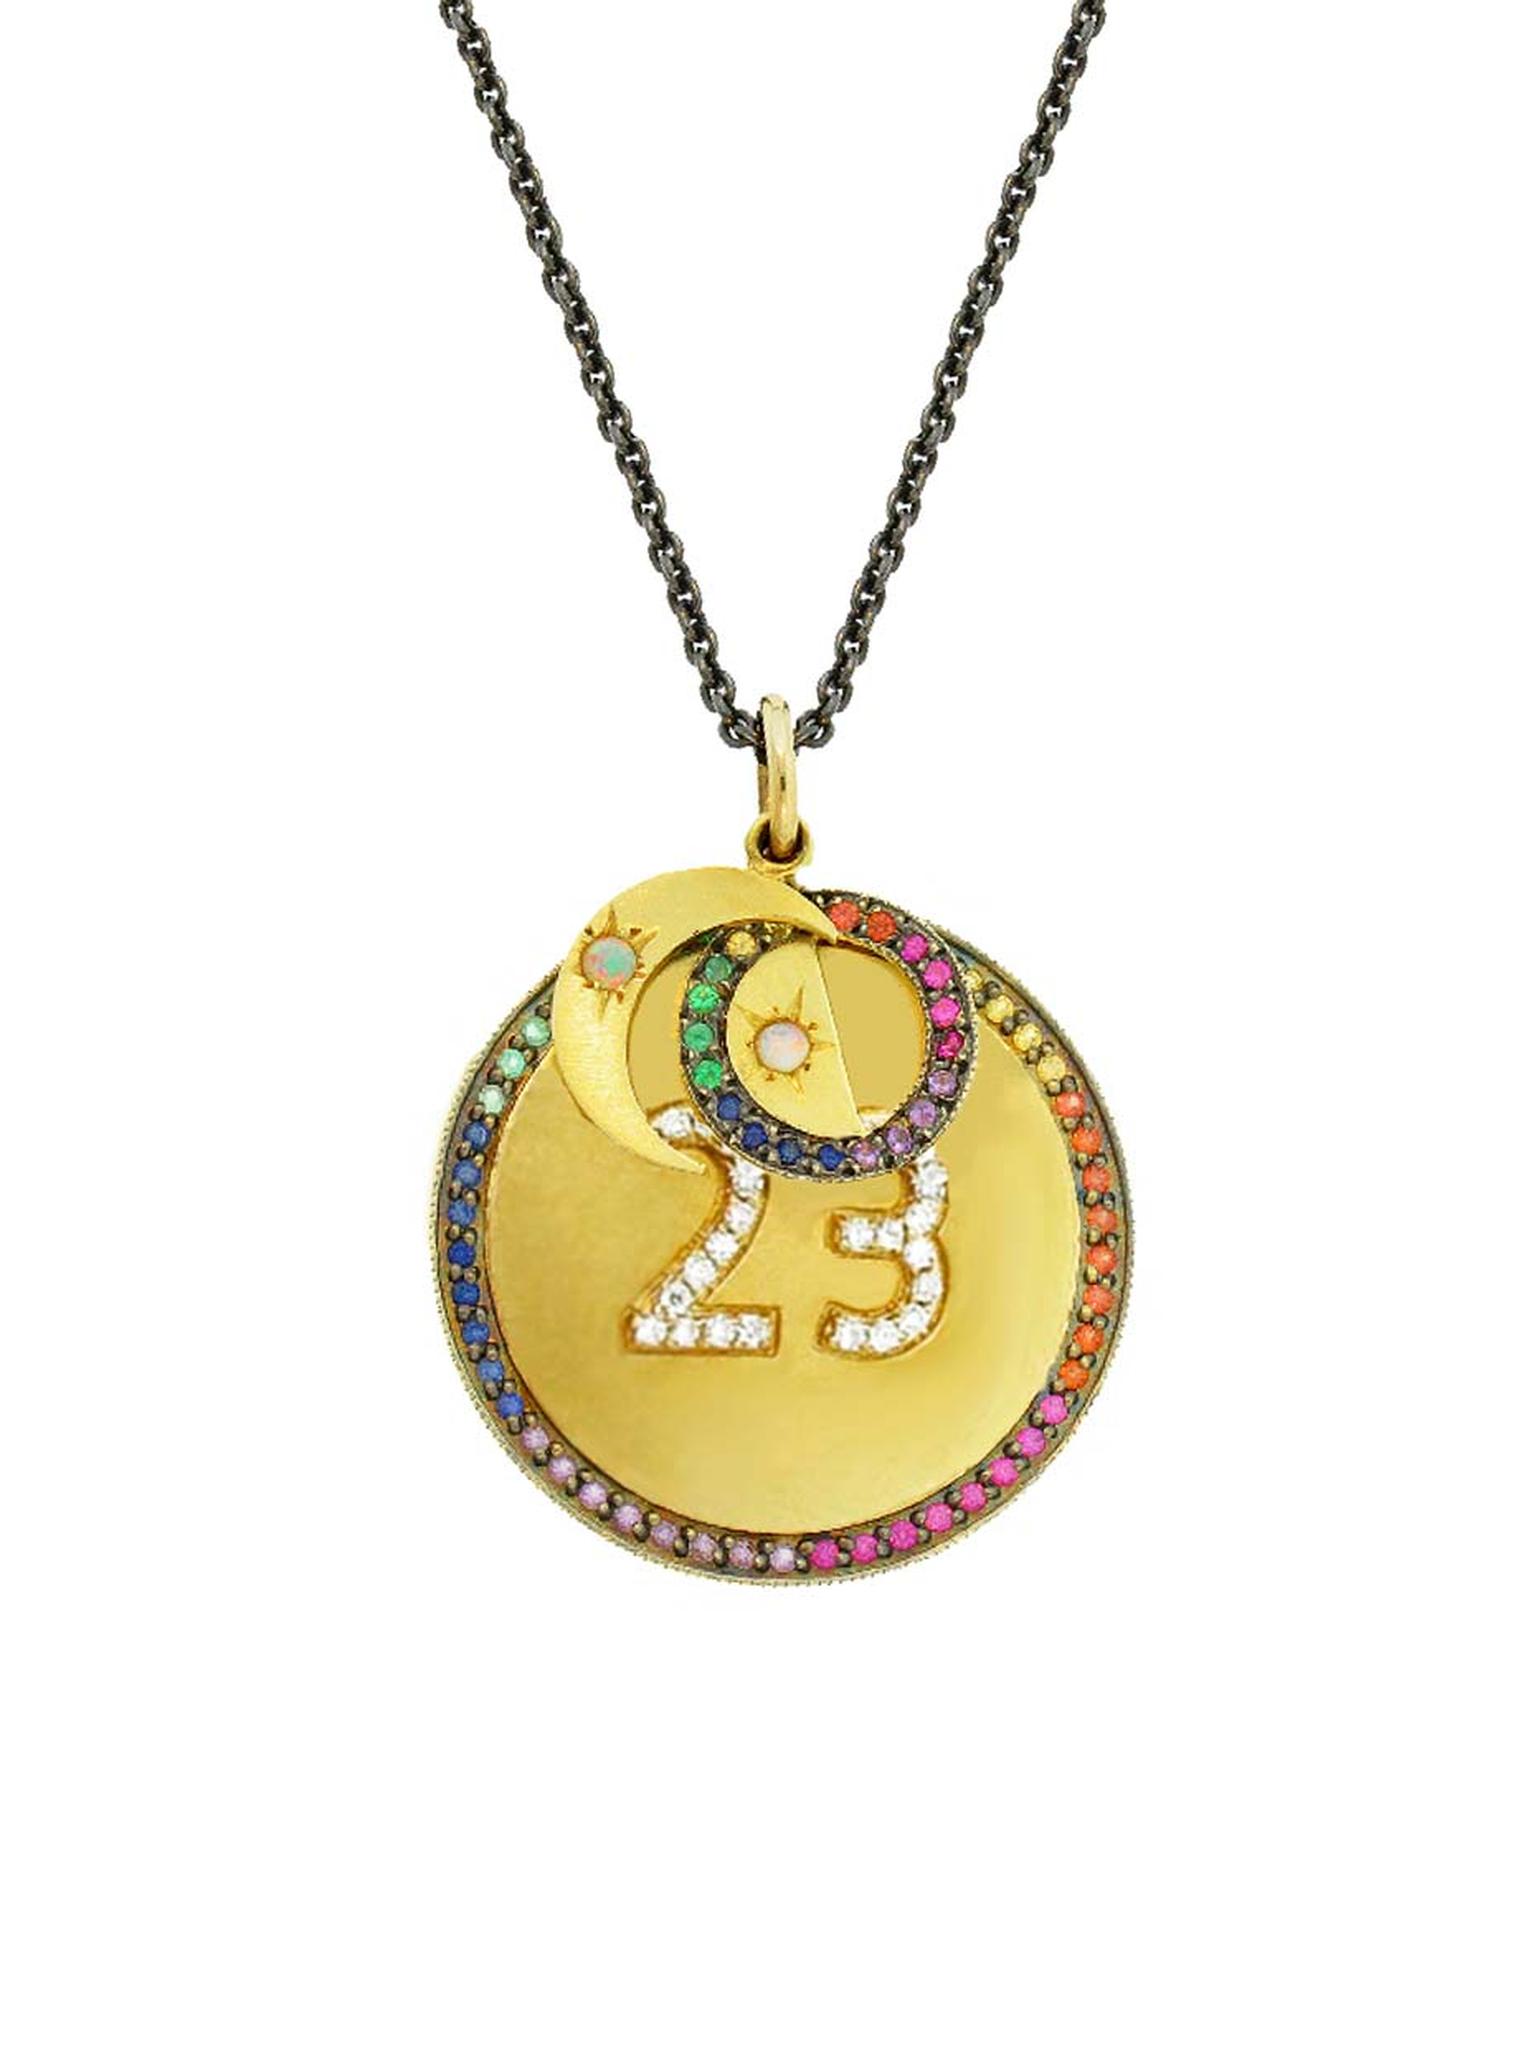 Andrea Fohrman Phases of the Moon necklace allows you to choose your own number, initials and the phase of the Moon under which you were born. Available from Ylang23.